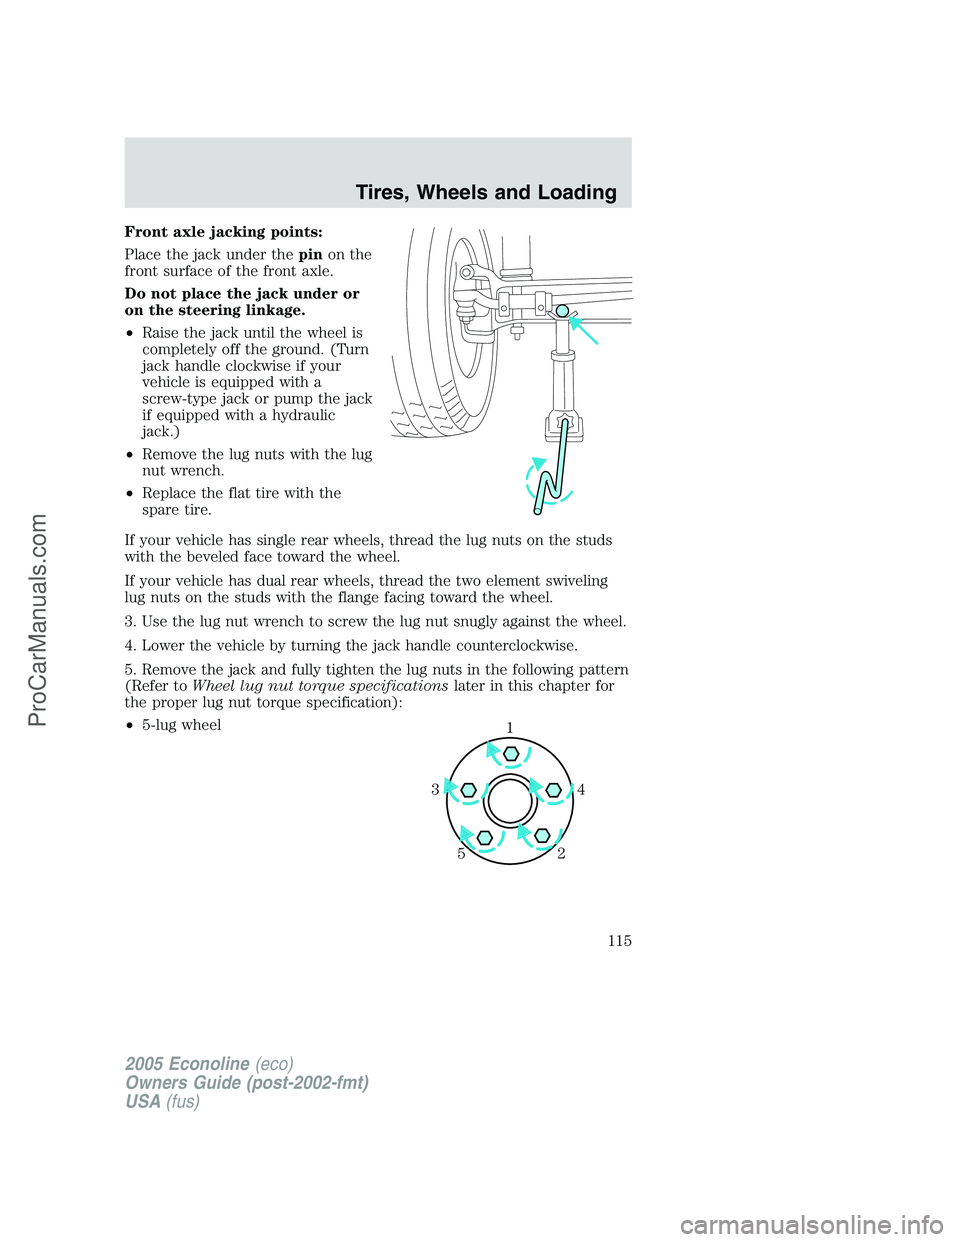 FORD E-450 2005  Owners Manual Front axle jacking points:
Place the jack under thepinon the
front surface of the front axle.
Do not place the jack under or
on the steering linkage.
•Raise the jack until the wheel is
completely of